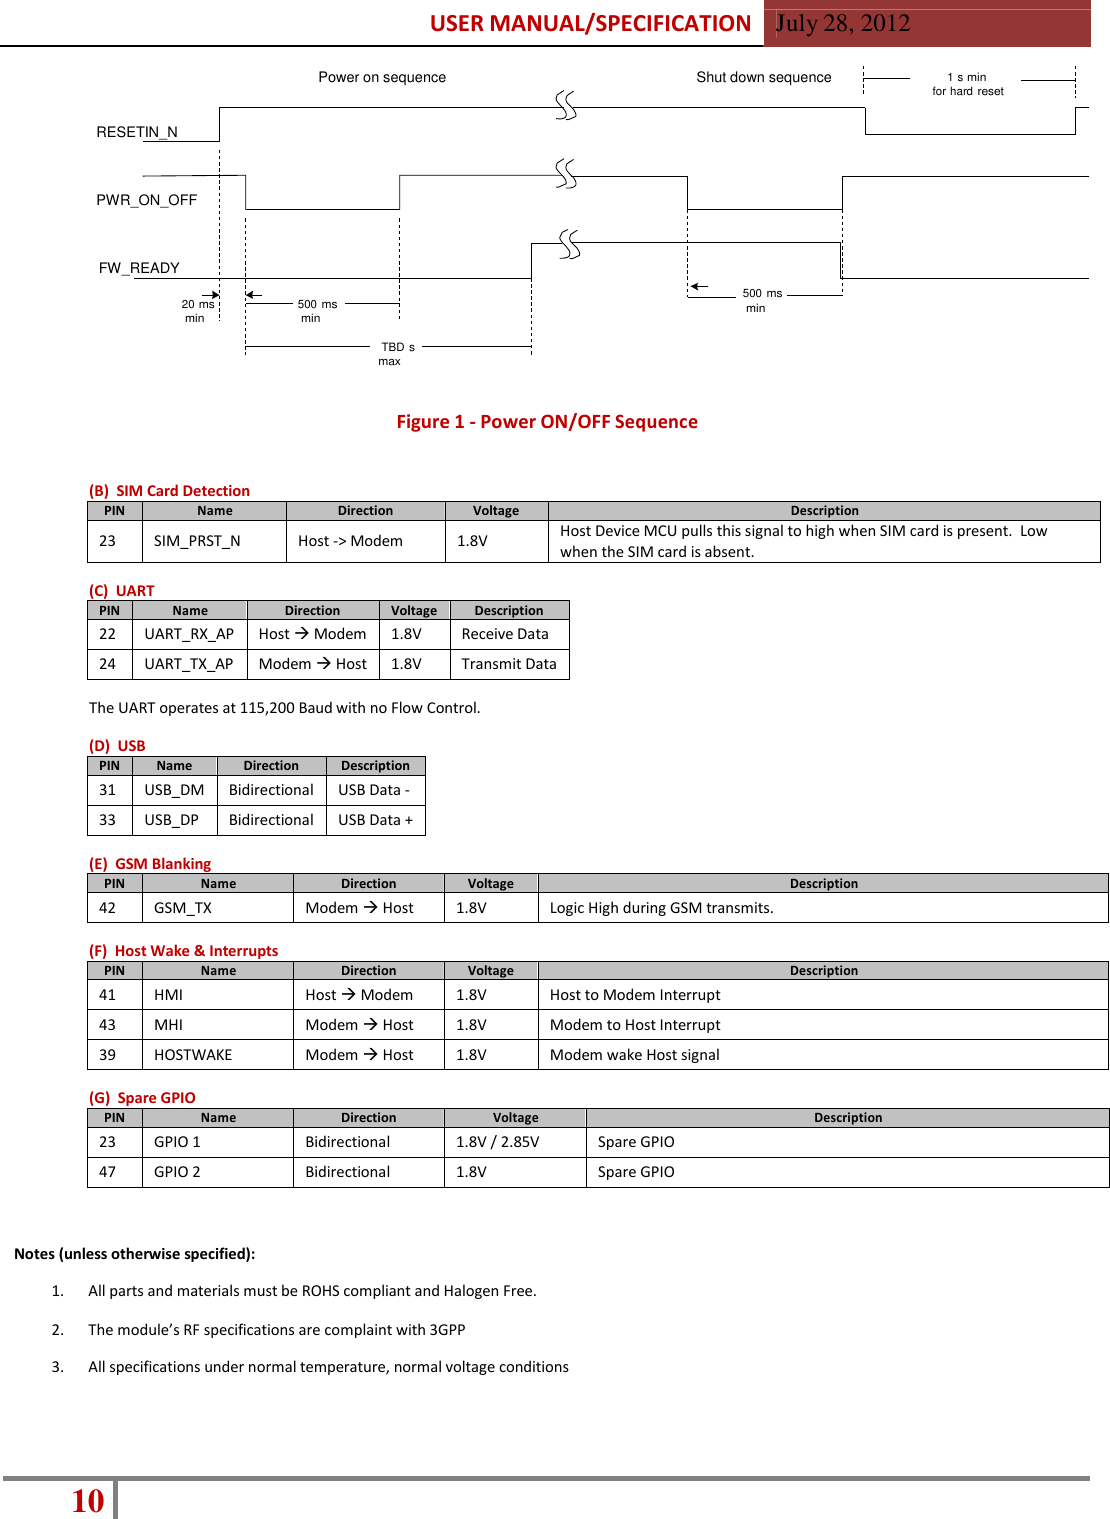 USER MANUAL/SPECIFICATION  July 28, 2012 10    Power on sequence  Shut down sequence  1 s min for hard reset  RESETIN_N   PWR_ON_OFF   FW_READY   20 ms min   500 ms min   500 ms min  TBD s max   Figure 1 - Power ON/OFF Sequence   (B)  SIM Card Detection PIN Name Direction Voltage Description 23 SIM_PRST_N Host -&gt; Modem 1.8V Host Device MCU pulls this signal to high when SIM card is present.  Low when the SIM card is absent.  (C)  UART PIN Name Direction Voltage Description 22 UART_RX_AP Host  Modem 1.8V Receive Data 24 UART_TX_AP Modem  Host 1.8V Transmit Data  The UART operates at 115,200 Baud with no Flow Control.  (D)  USB PIN Name Direction Description 31 USB_DM Bidirectional USB Data - 33 USB_DP Bidirectional USB Data +  (E)  GSM Blanking PIN Name Direction Voltage Description 42 GSM_TX Modem  Host 1.8V Logic High during GSM transmits.  (F)  Host Wake &amp; Interrupts PIN Name Direction Voltage Description 41 HMI Host  Modem 1.8V Host to Modem Interrupt 43 MHI Modem  Host 1.8V Modem to Host Interrupt 39 HOSTWAKE Modem  Host 1.8V Modem wake Host signal  (G)  Spare GPIO PIN Name Direction Voltage Description 23 GPIO 1 Bidirectional 1.8V / 2.85V Spare GPIO 47 GPIO 2 Bidirectional 1.8V Spare GPIO    Notes (unless otherwise specified):  1.  All parts and materials must be ROHS compliant and Halogen Free.  2.  The module’s RF specifications are complaint with 3GPP  3.  All specifications under normal temperature, normal voltage conditions 